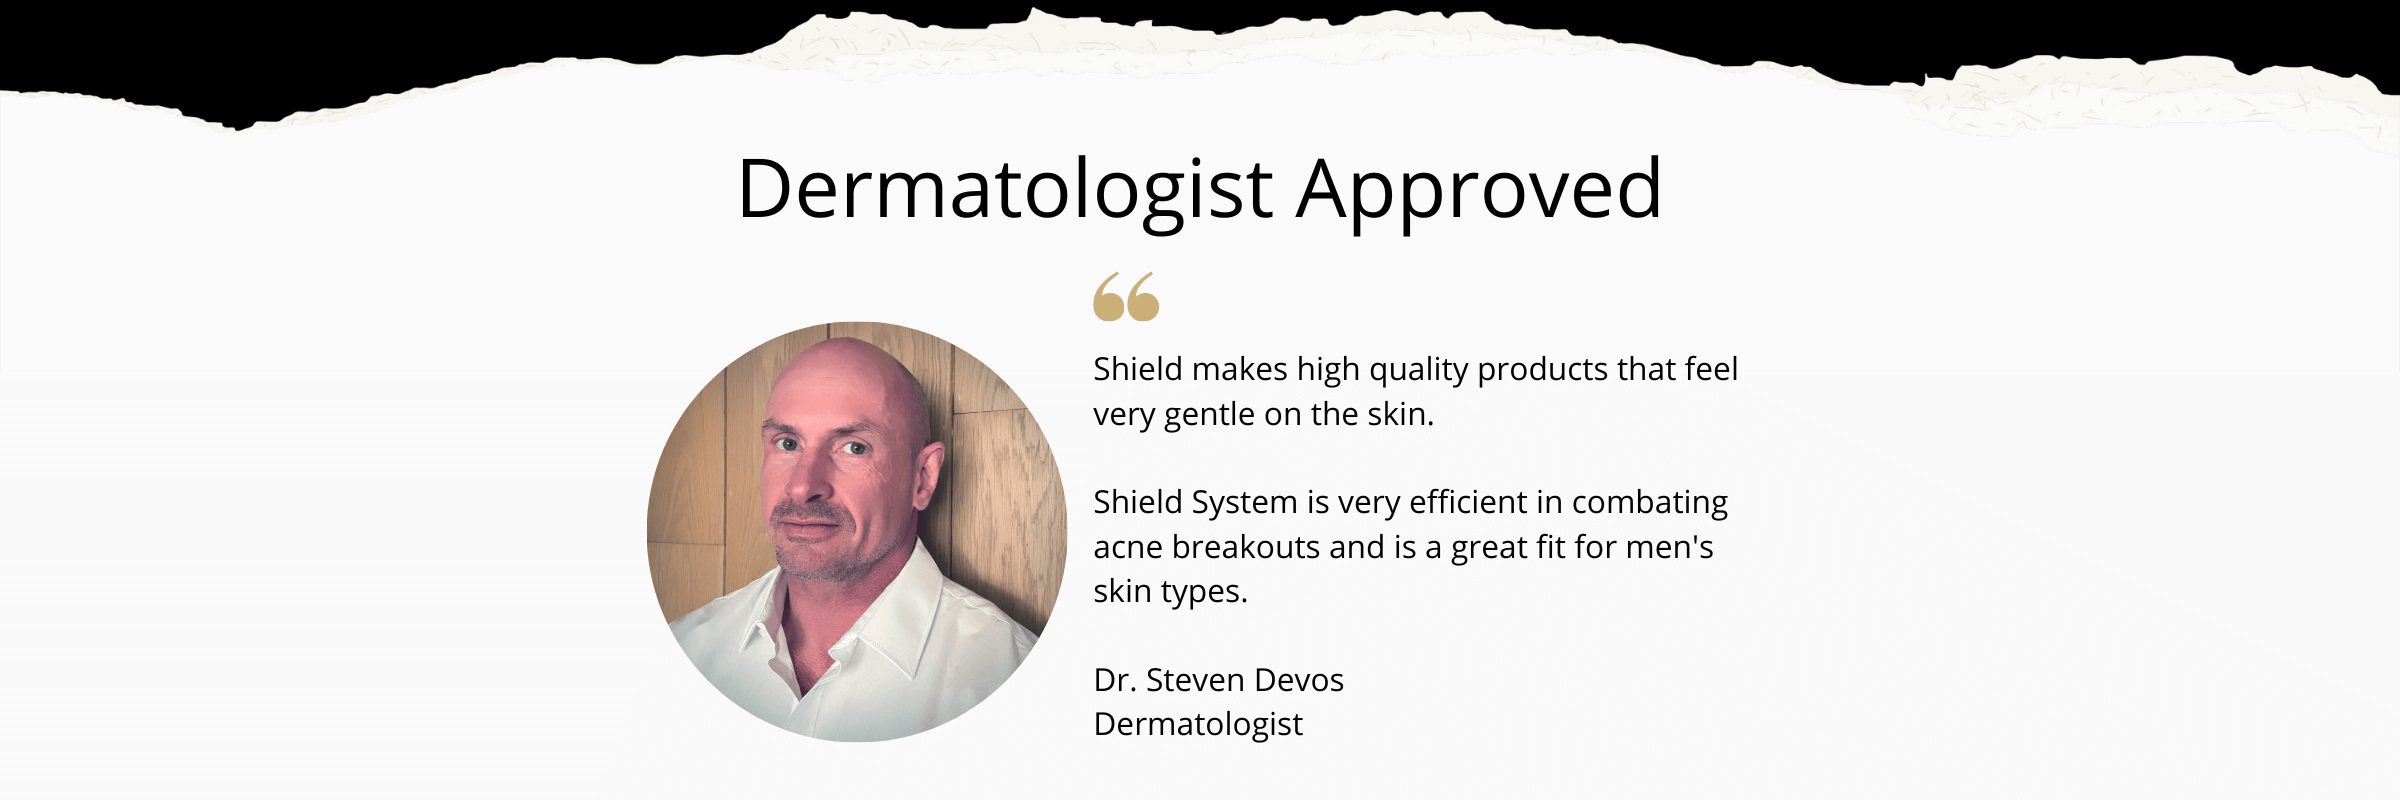 Dermatologist Approved